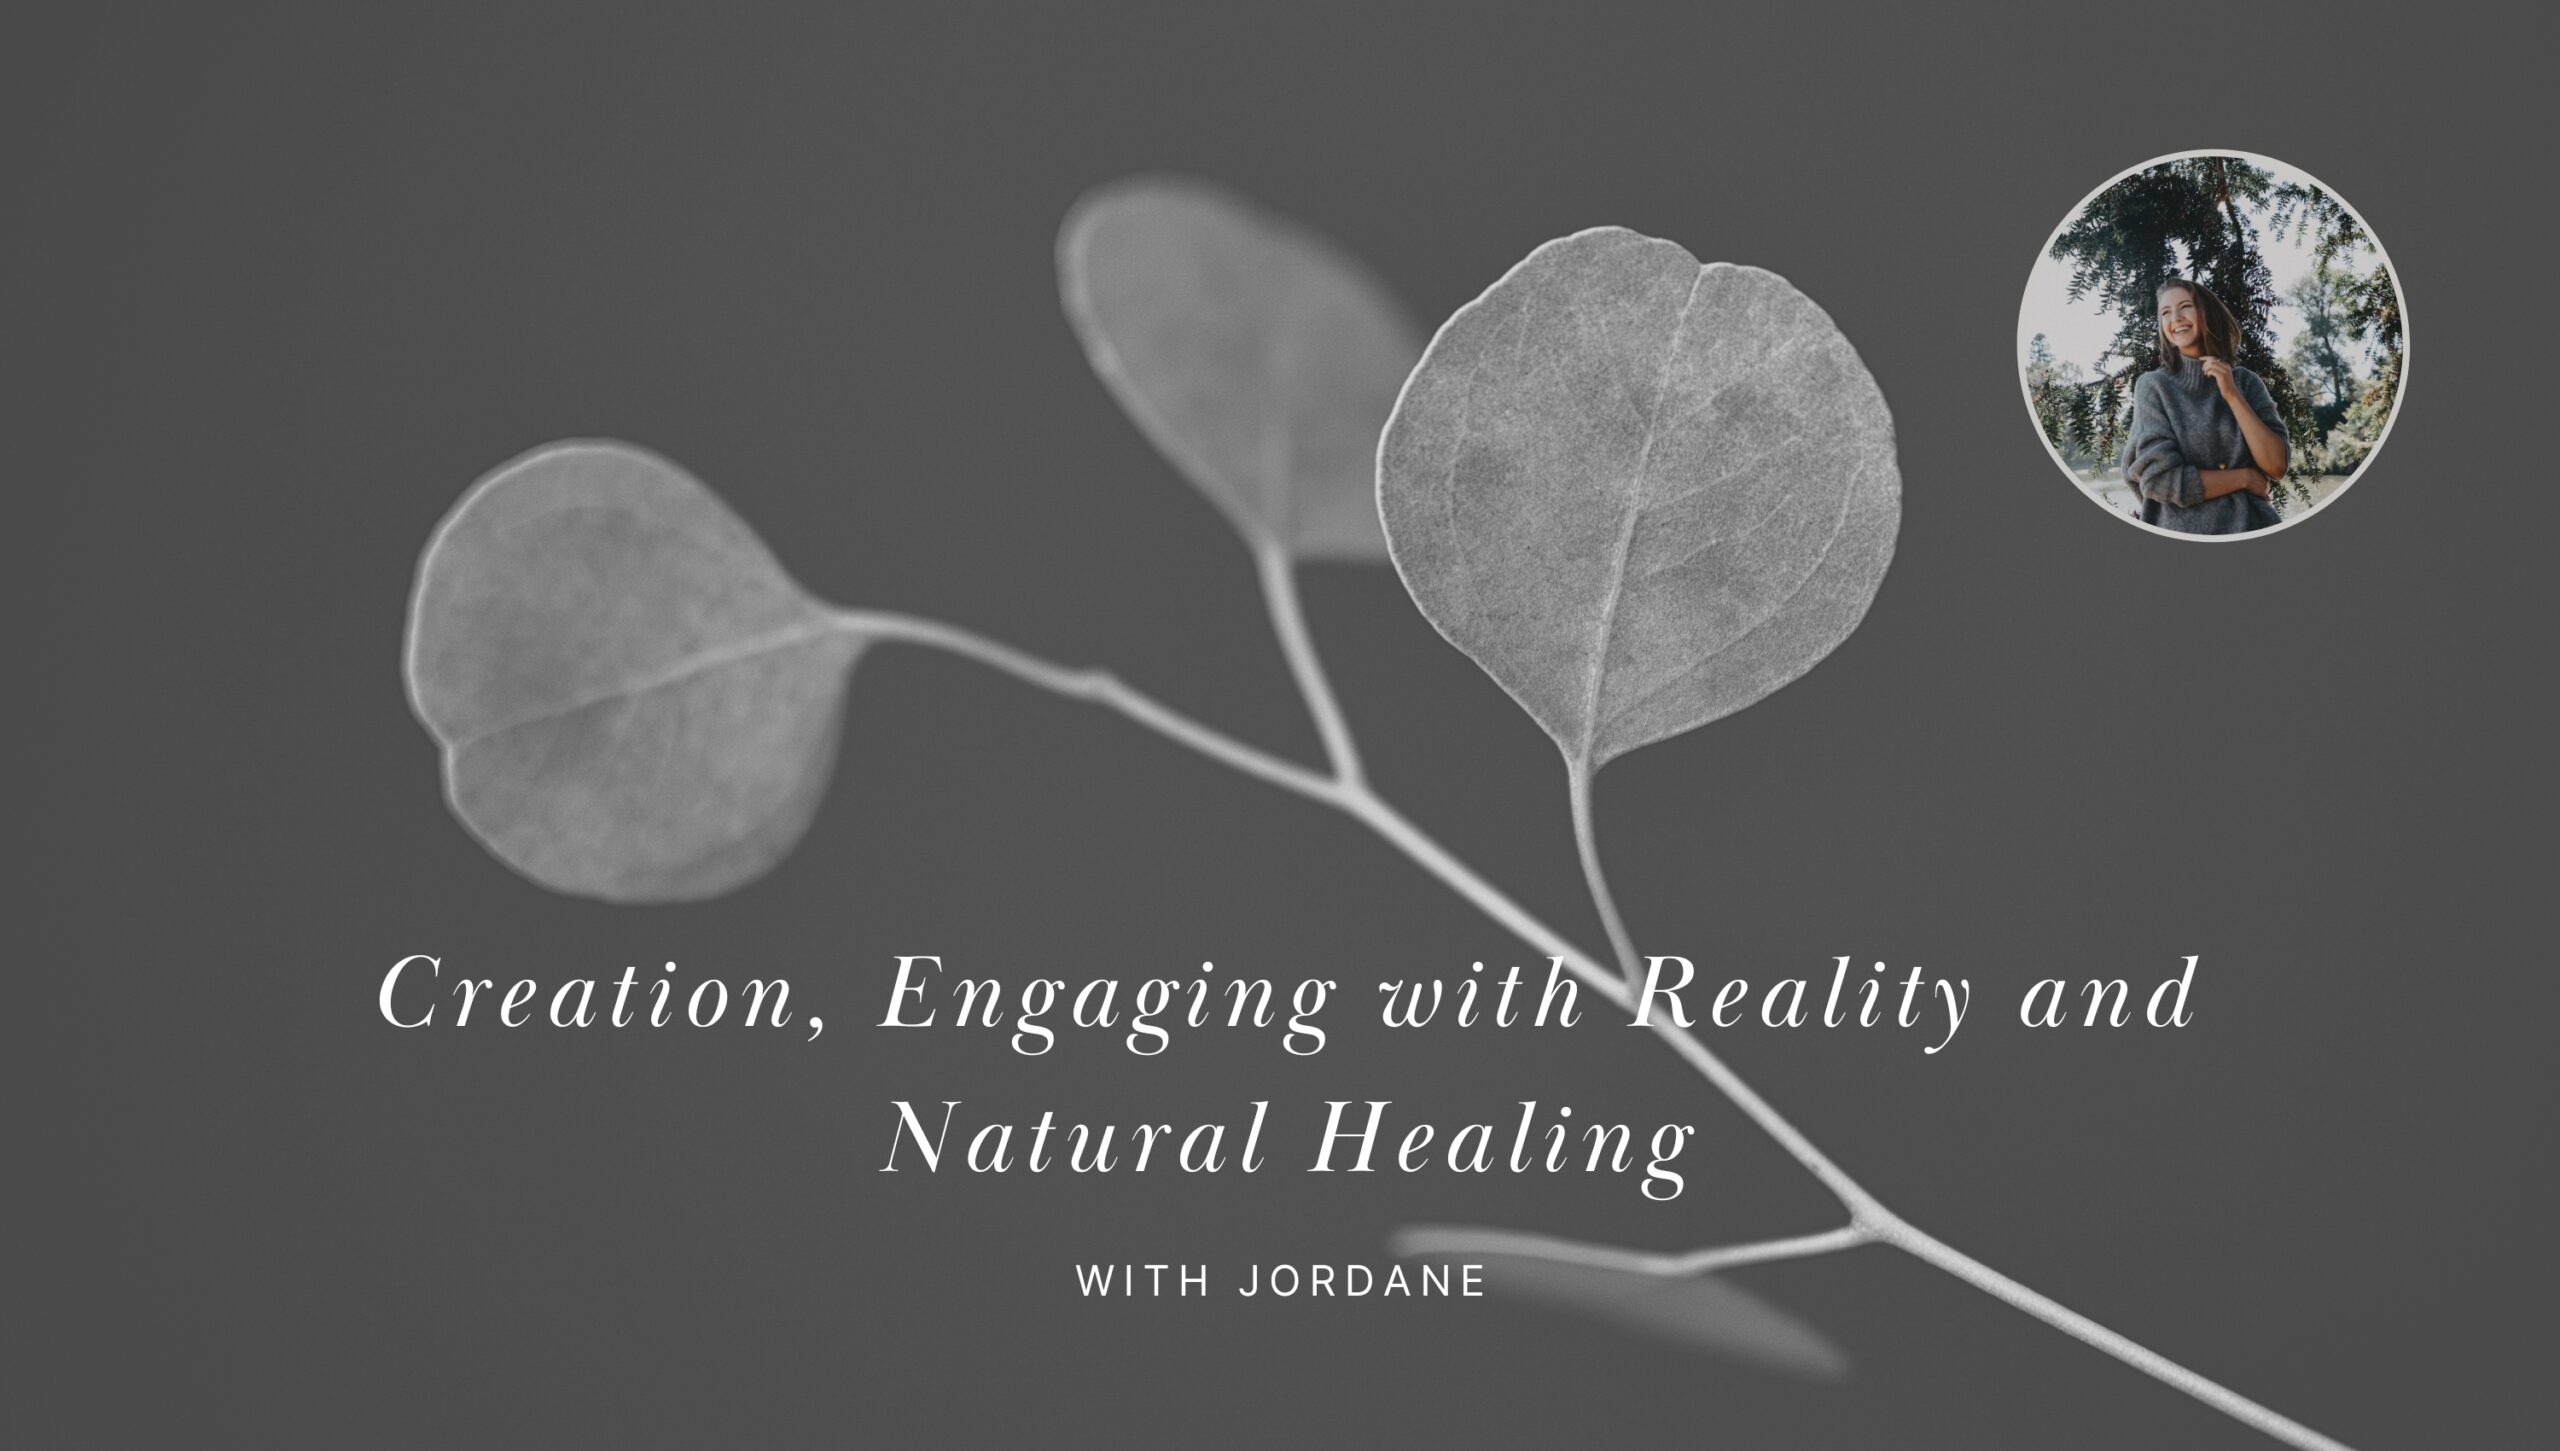 Creation, Engaging with Reality and Natural Healing with Jordane Girl and Her Moon the Podcast